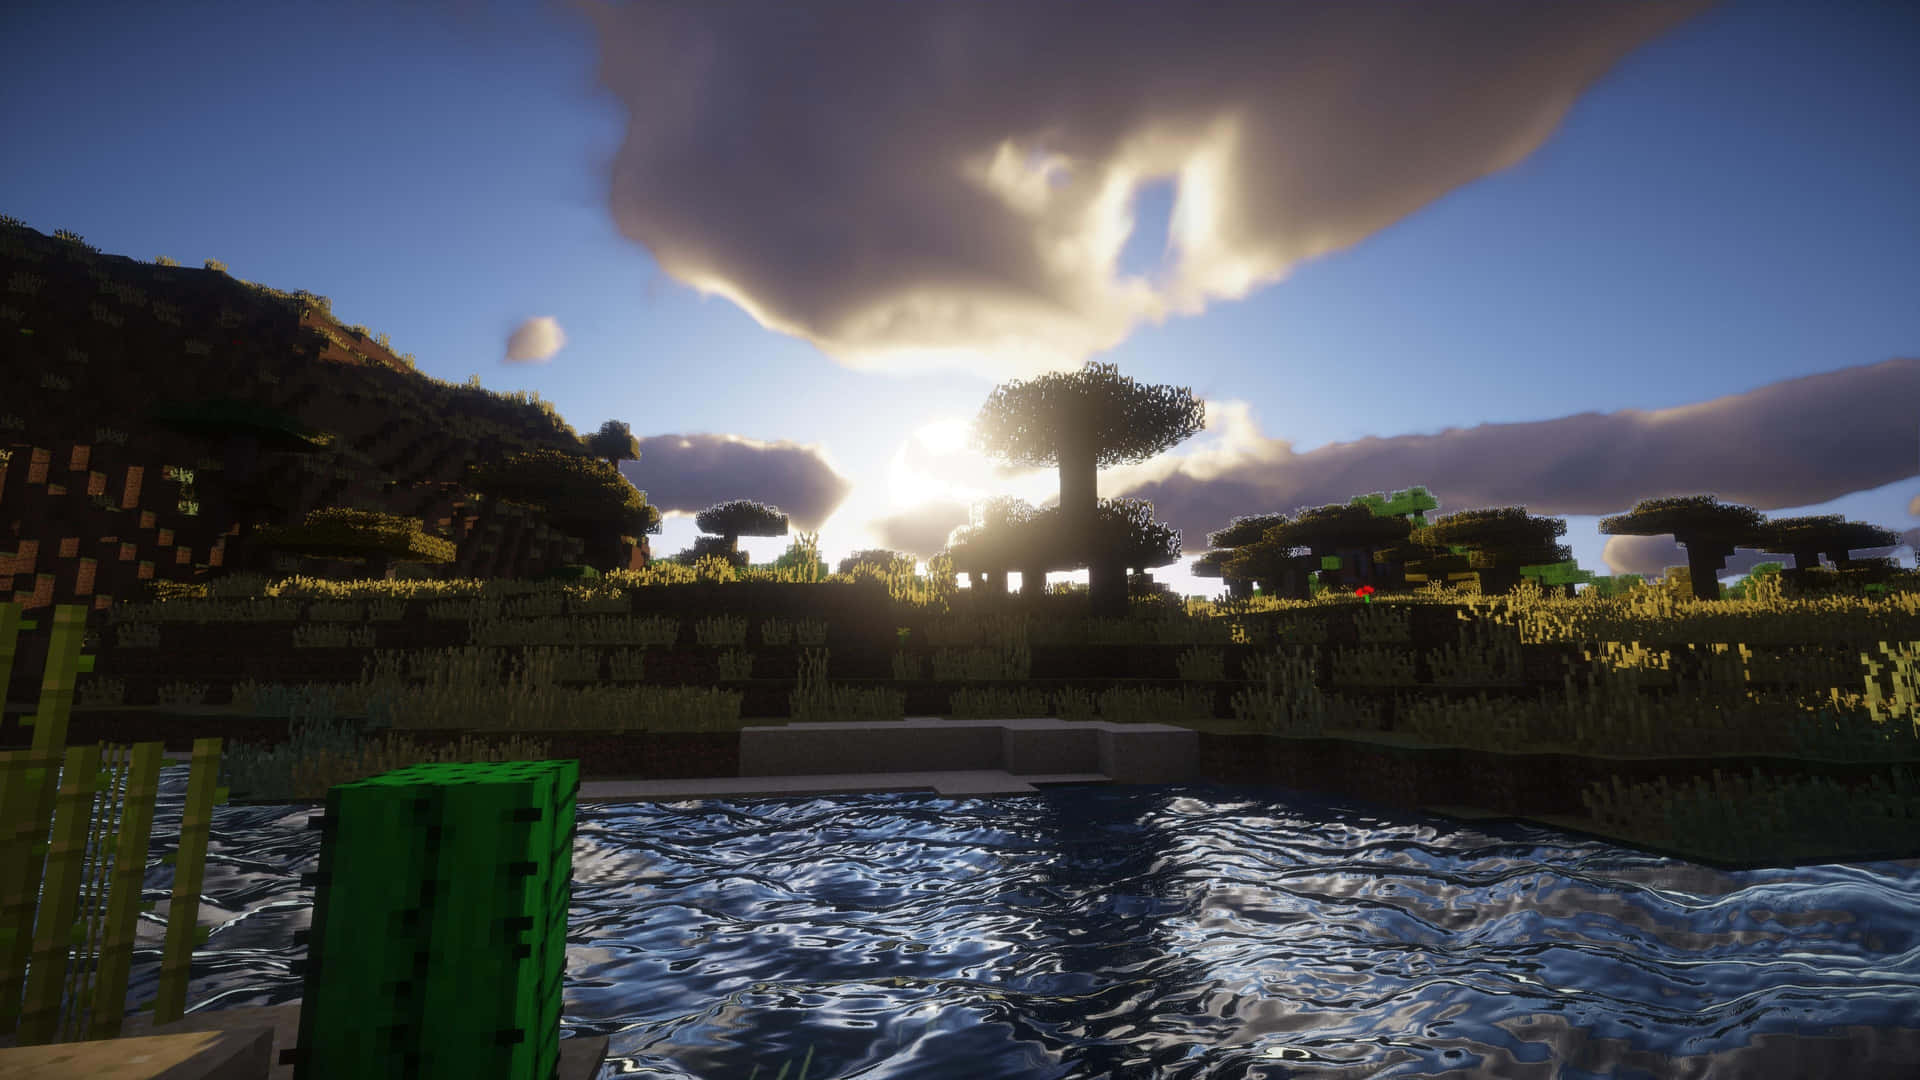 "Experience the beauty of Minecraft with Shaders!" Wallpaper